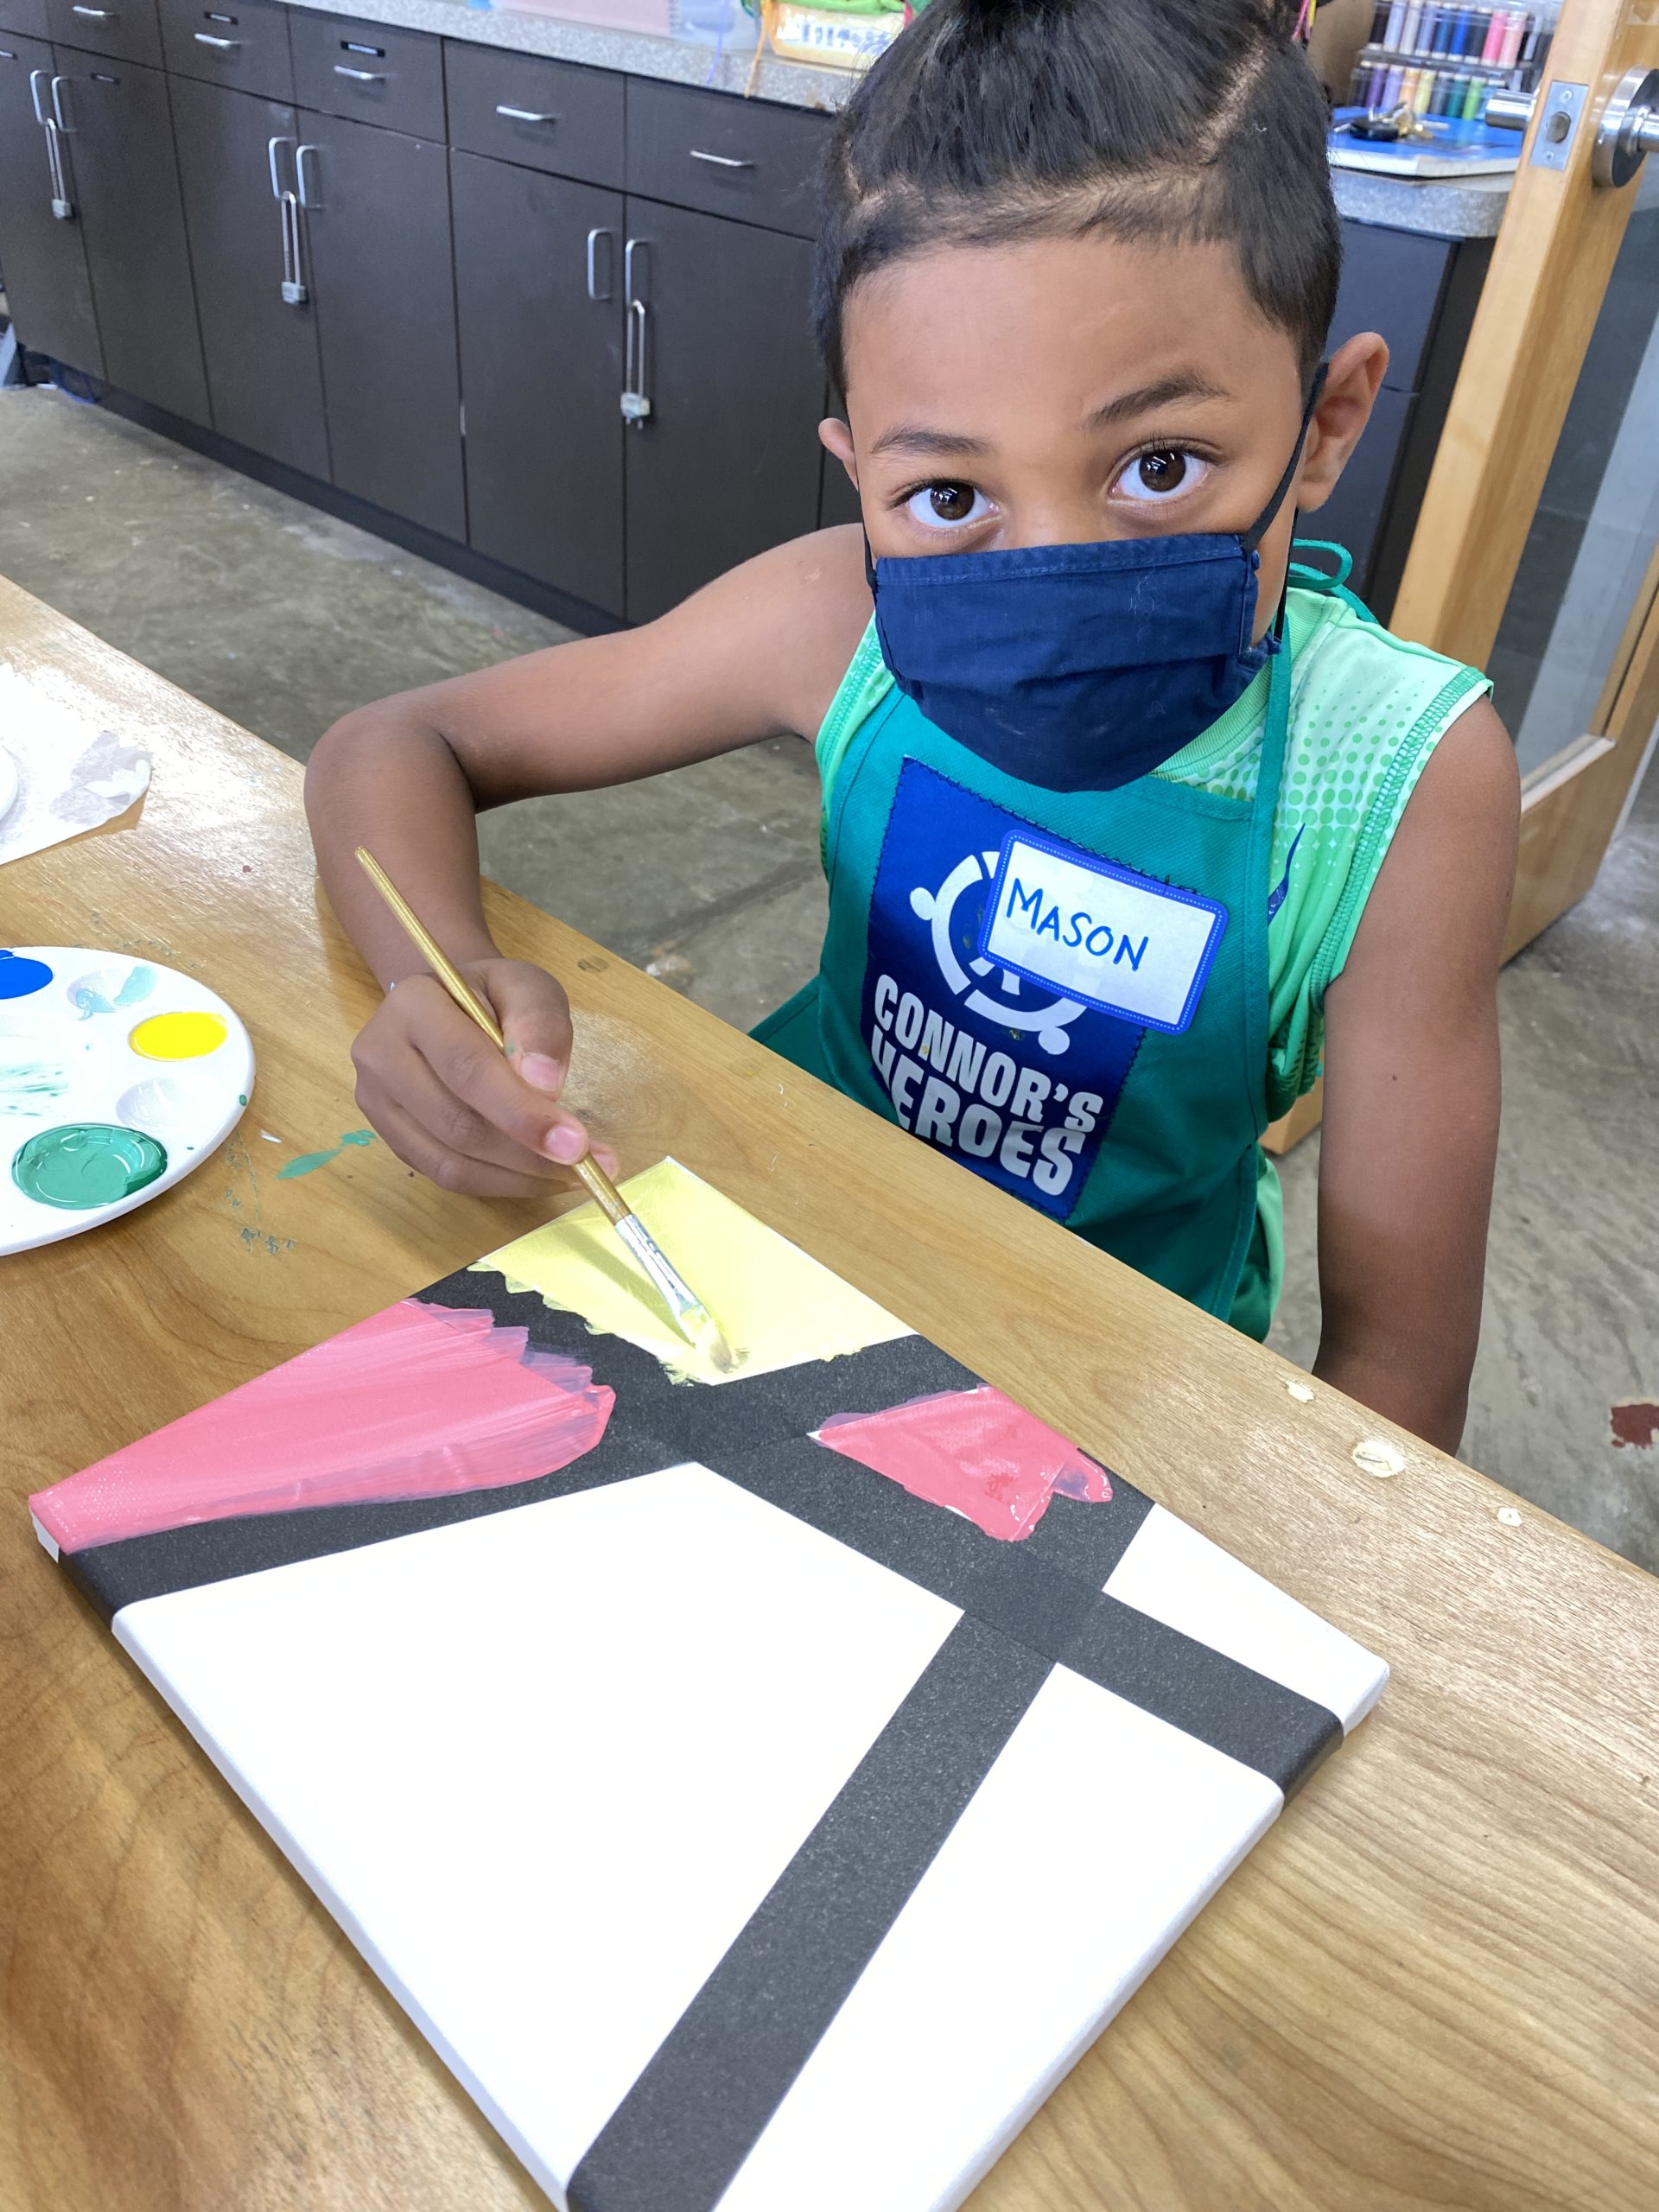 Image a child wearing a mask and painting a small canvas